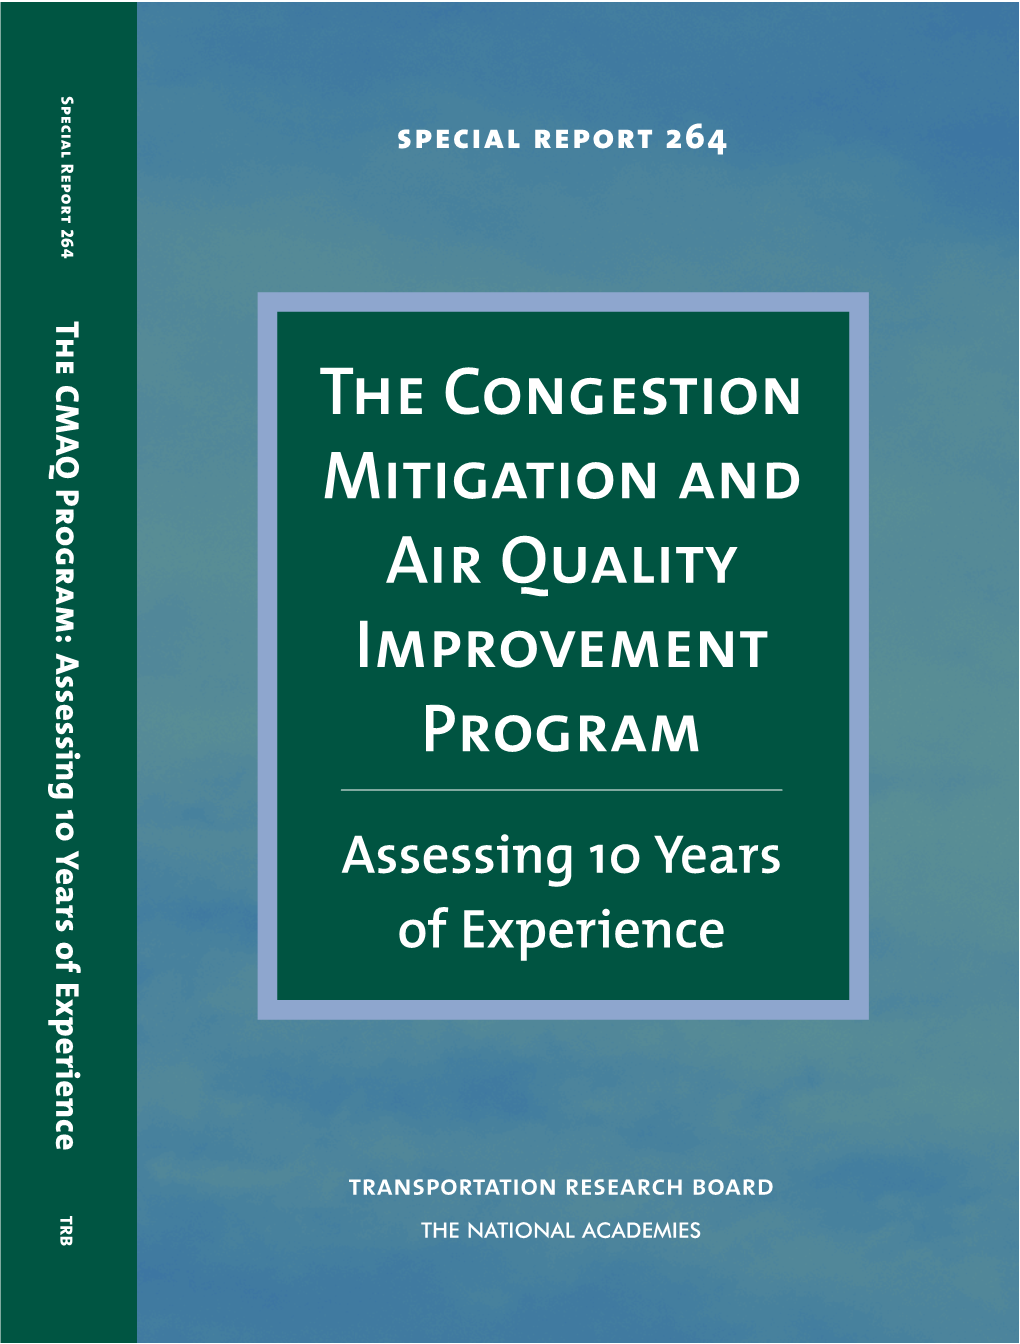 The Congestion Mitigation and Air Quality Improvement Program